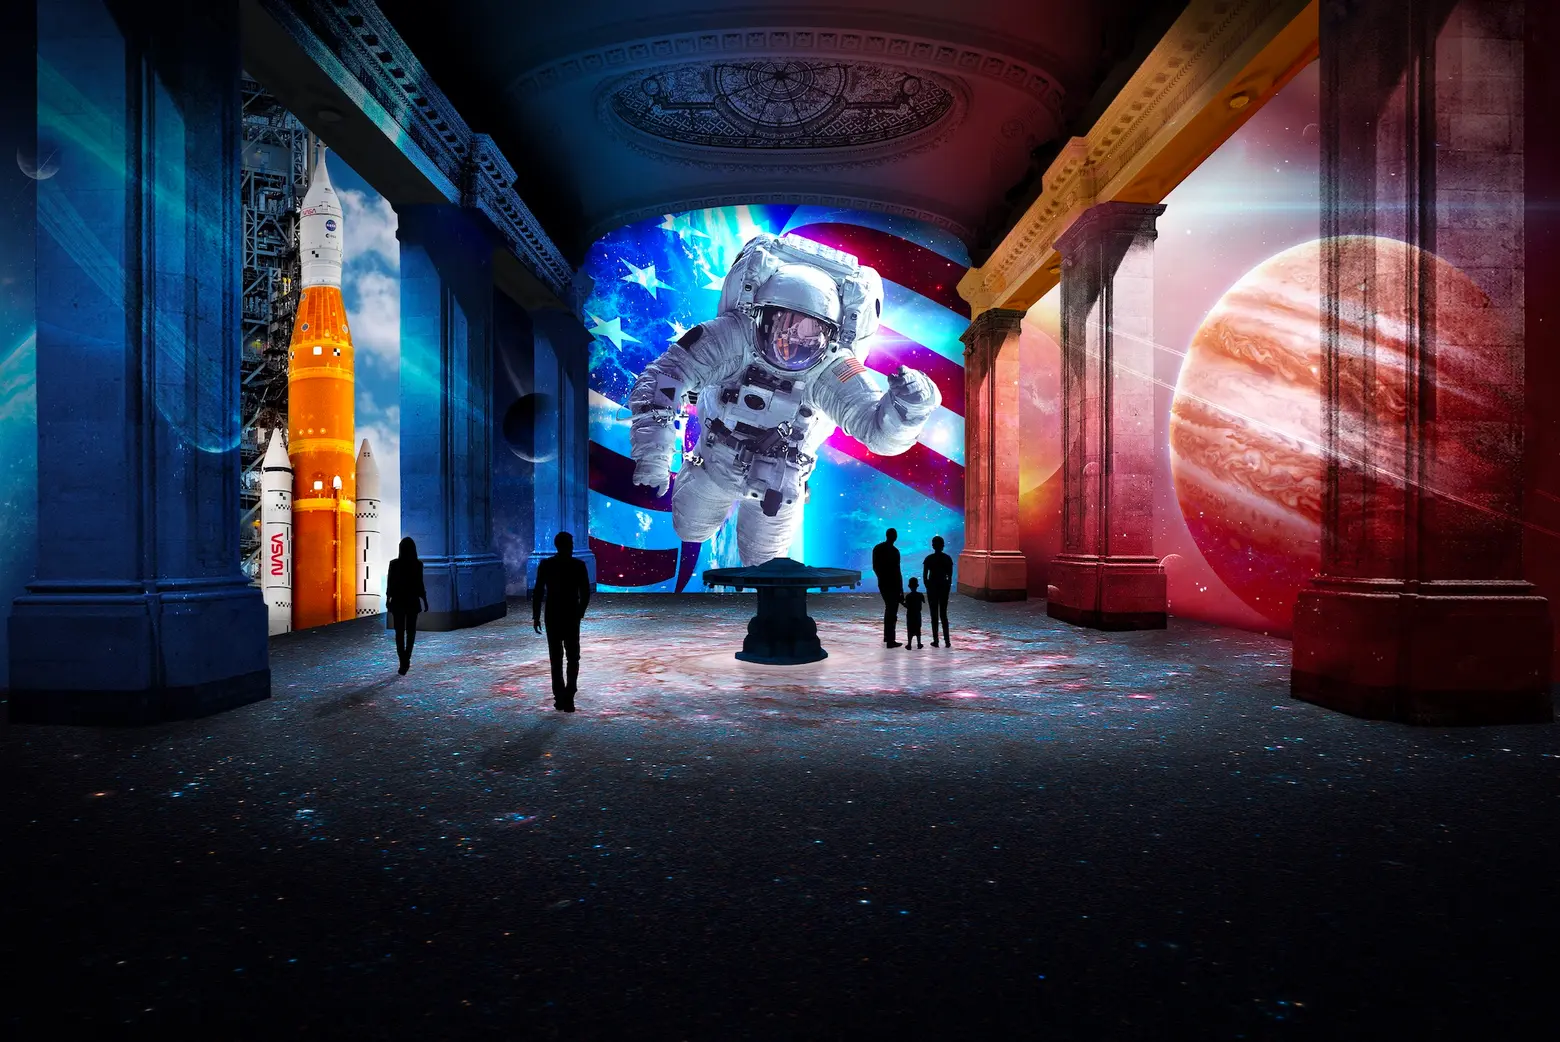 Take a journey through space at Tribeca’s Hall des Lumières